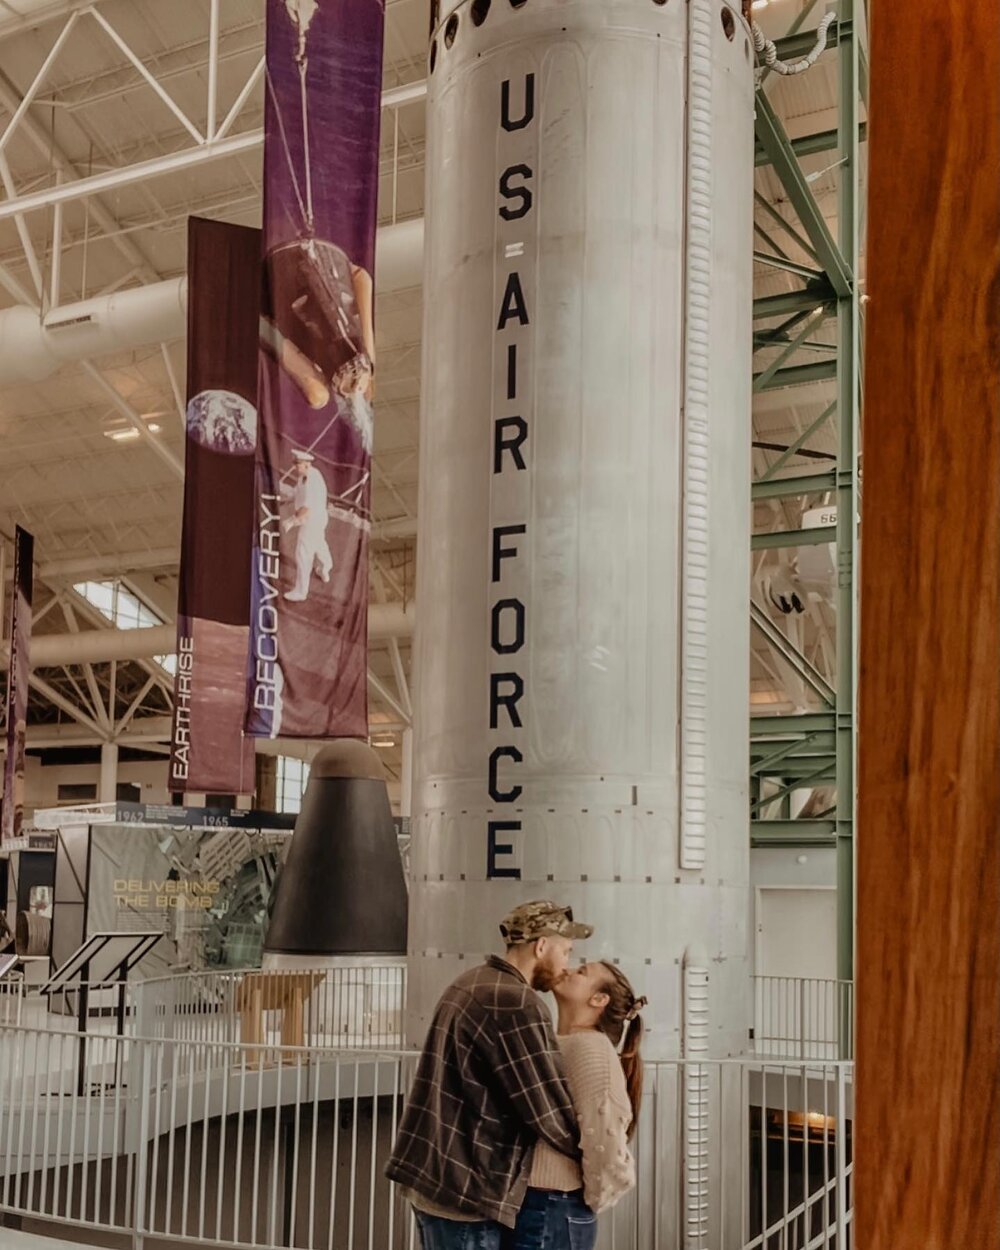 ✨TILL THE STARS BURN OUT✨
&bull;
Day trip to the Evergreen Aviation Museum this weekend with family. 
&bull;
&bull;
&bull;
#mnypreset #evergreenaviationmuseum #nasa #sprucegoose #daytrip #removebeforeflight #removebeforeflightkeychain #tillthestarsbu